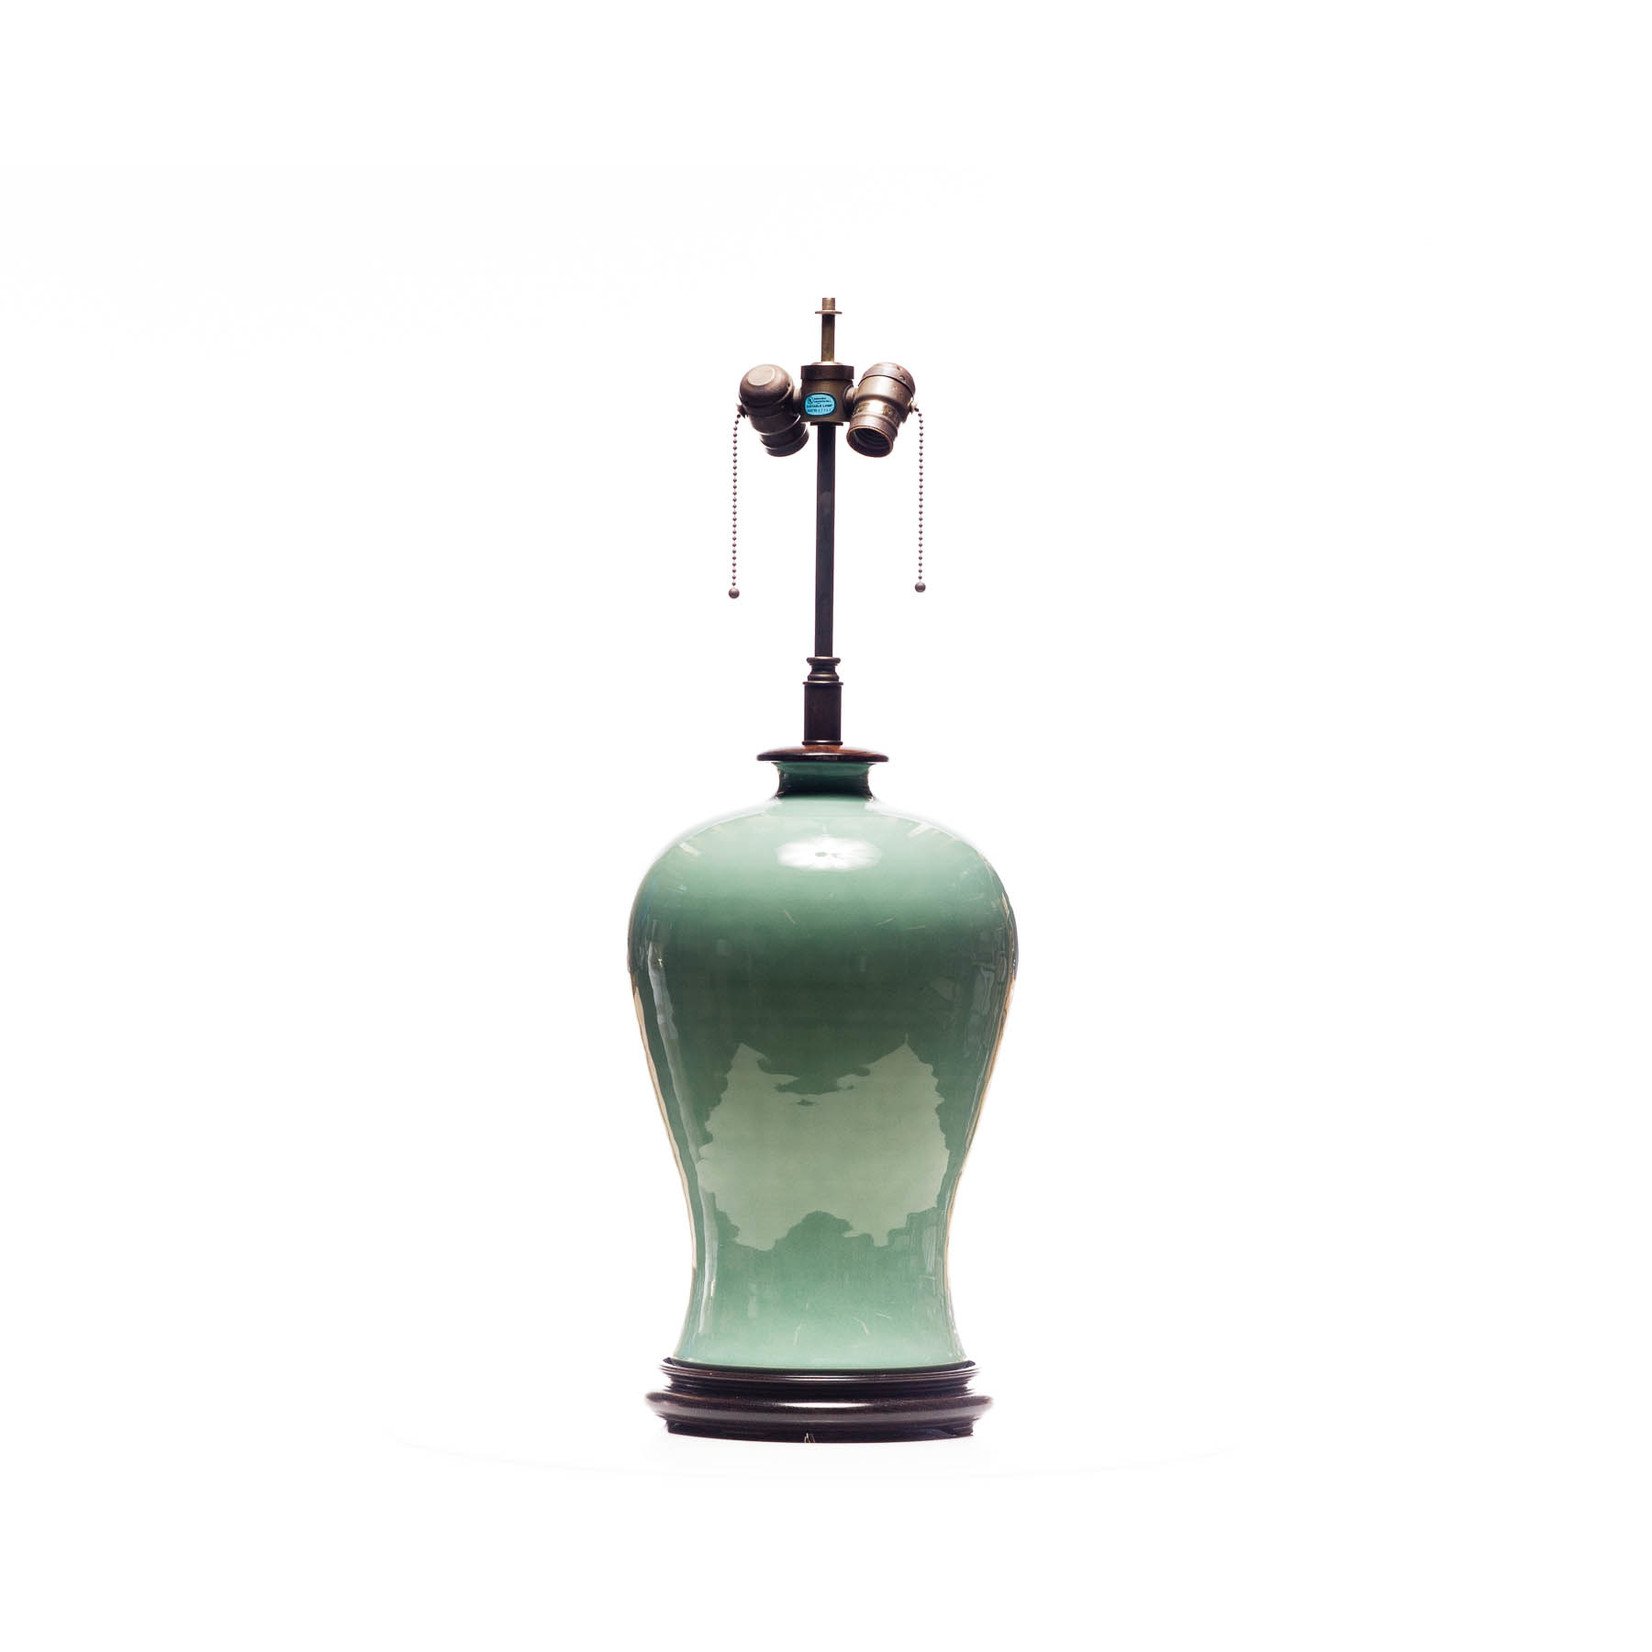 Lawrence & Scott Legacy Dashiell Table Lamp in Aquamarine with rosewood stand